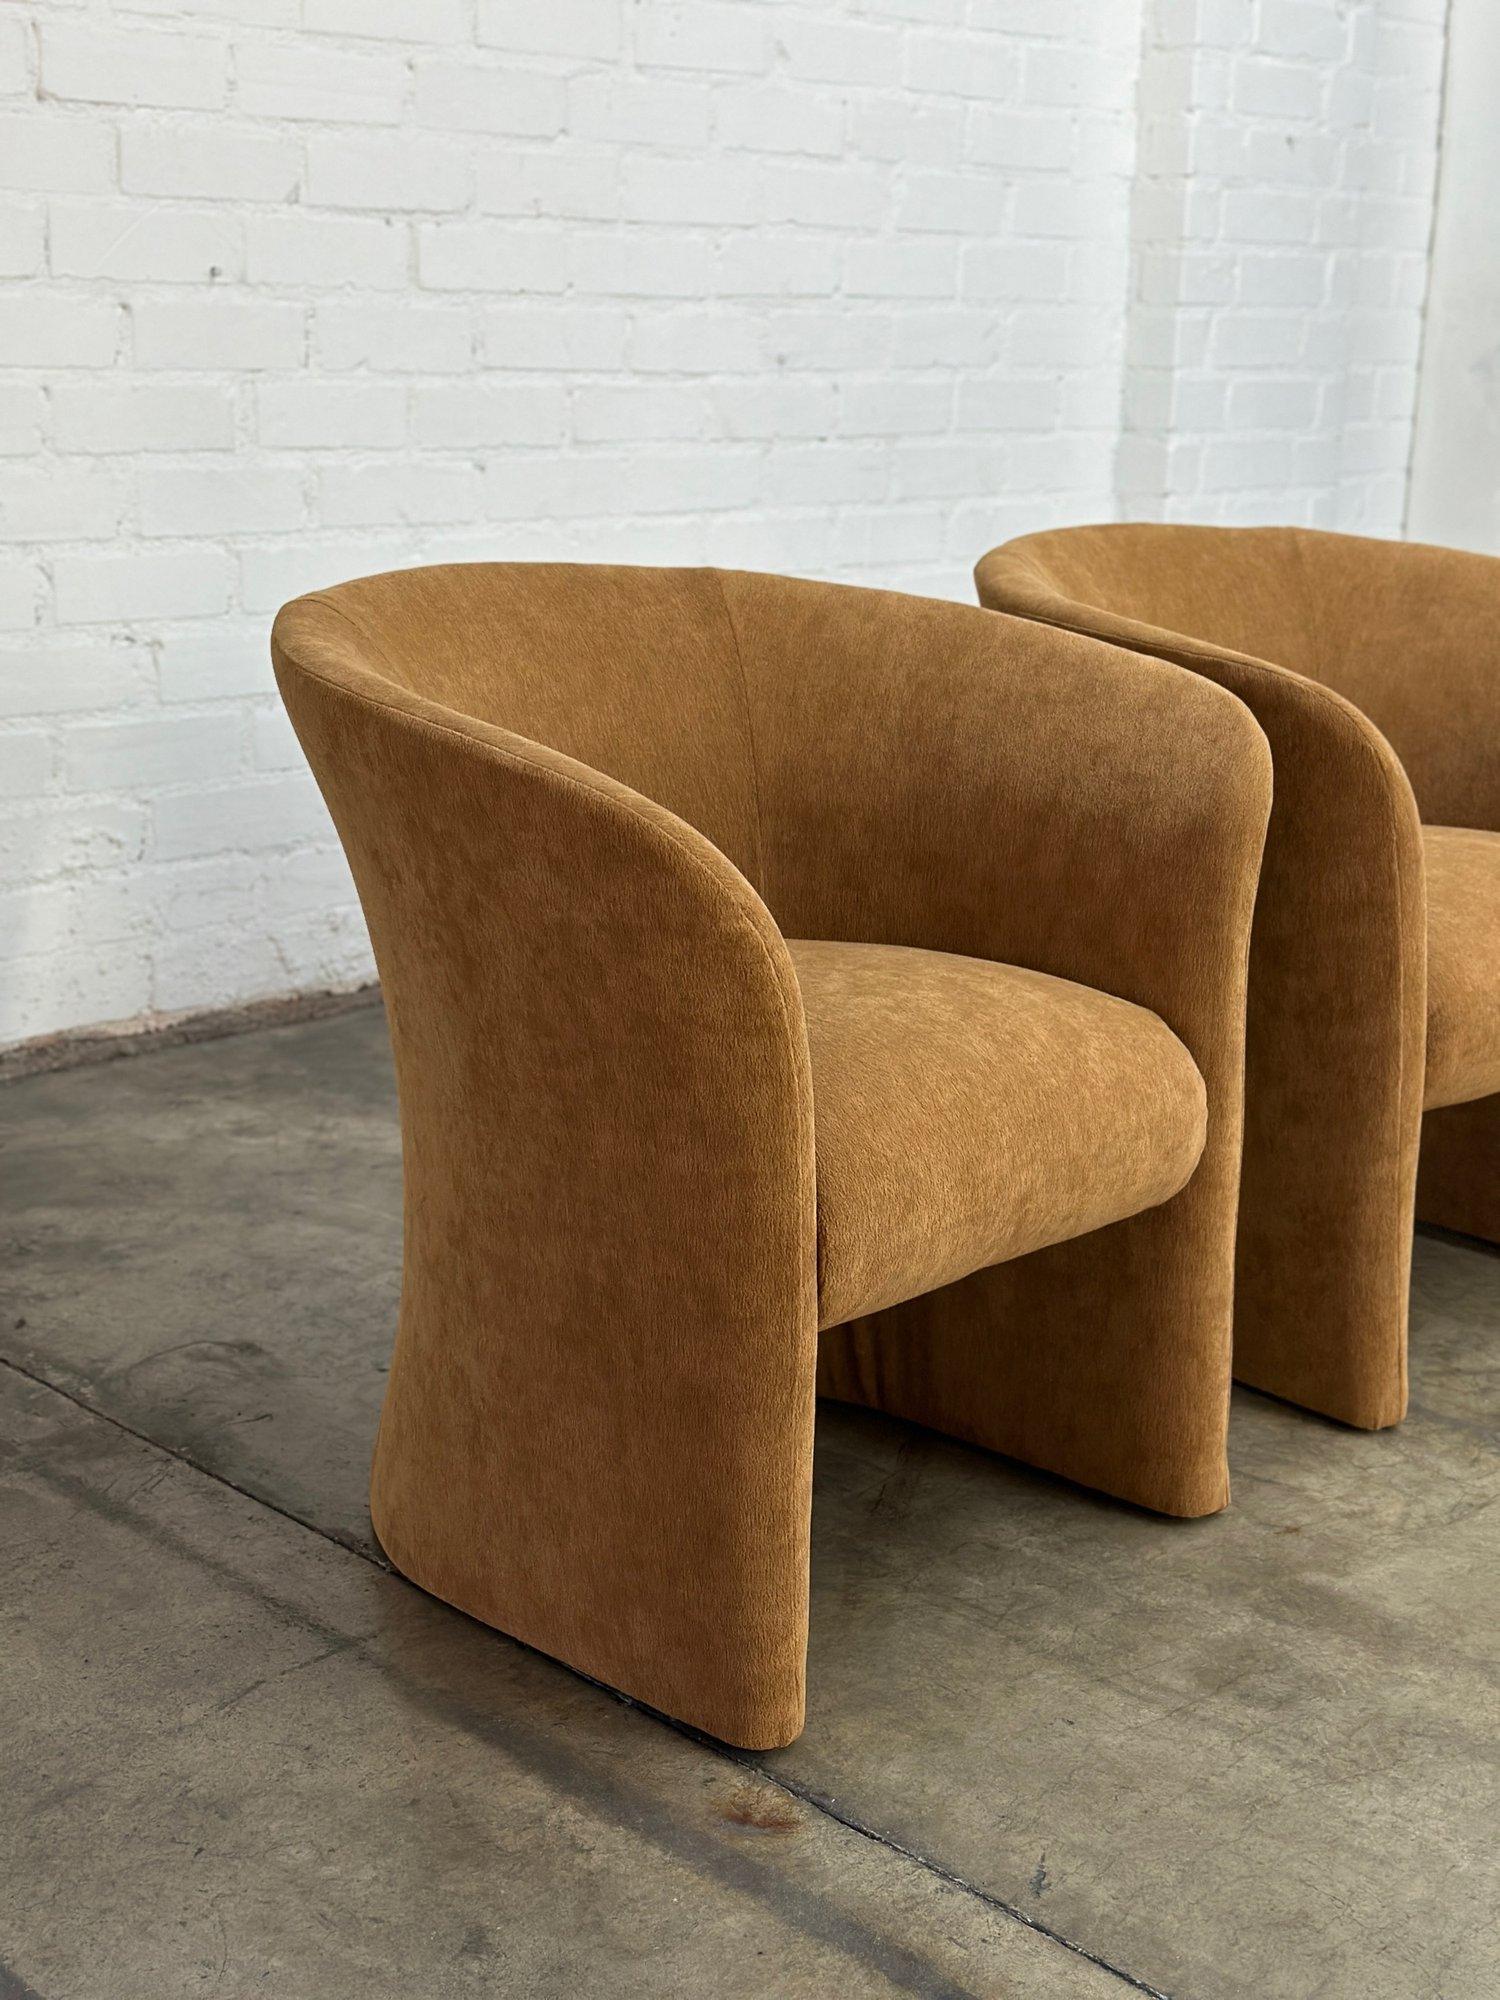 W30 D19 H29 SW17 SD19 SH17 AH26

Pair of newly upholstered curved barrel back chairs. These feature slightly sculpted design with a sturdy inner metal frame. Chairs show well with no visible areas of wear. Price is for the pair.